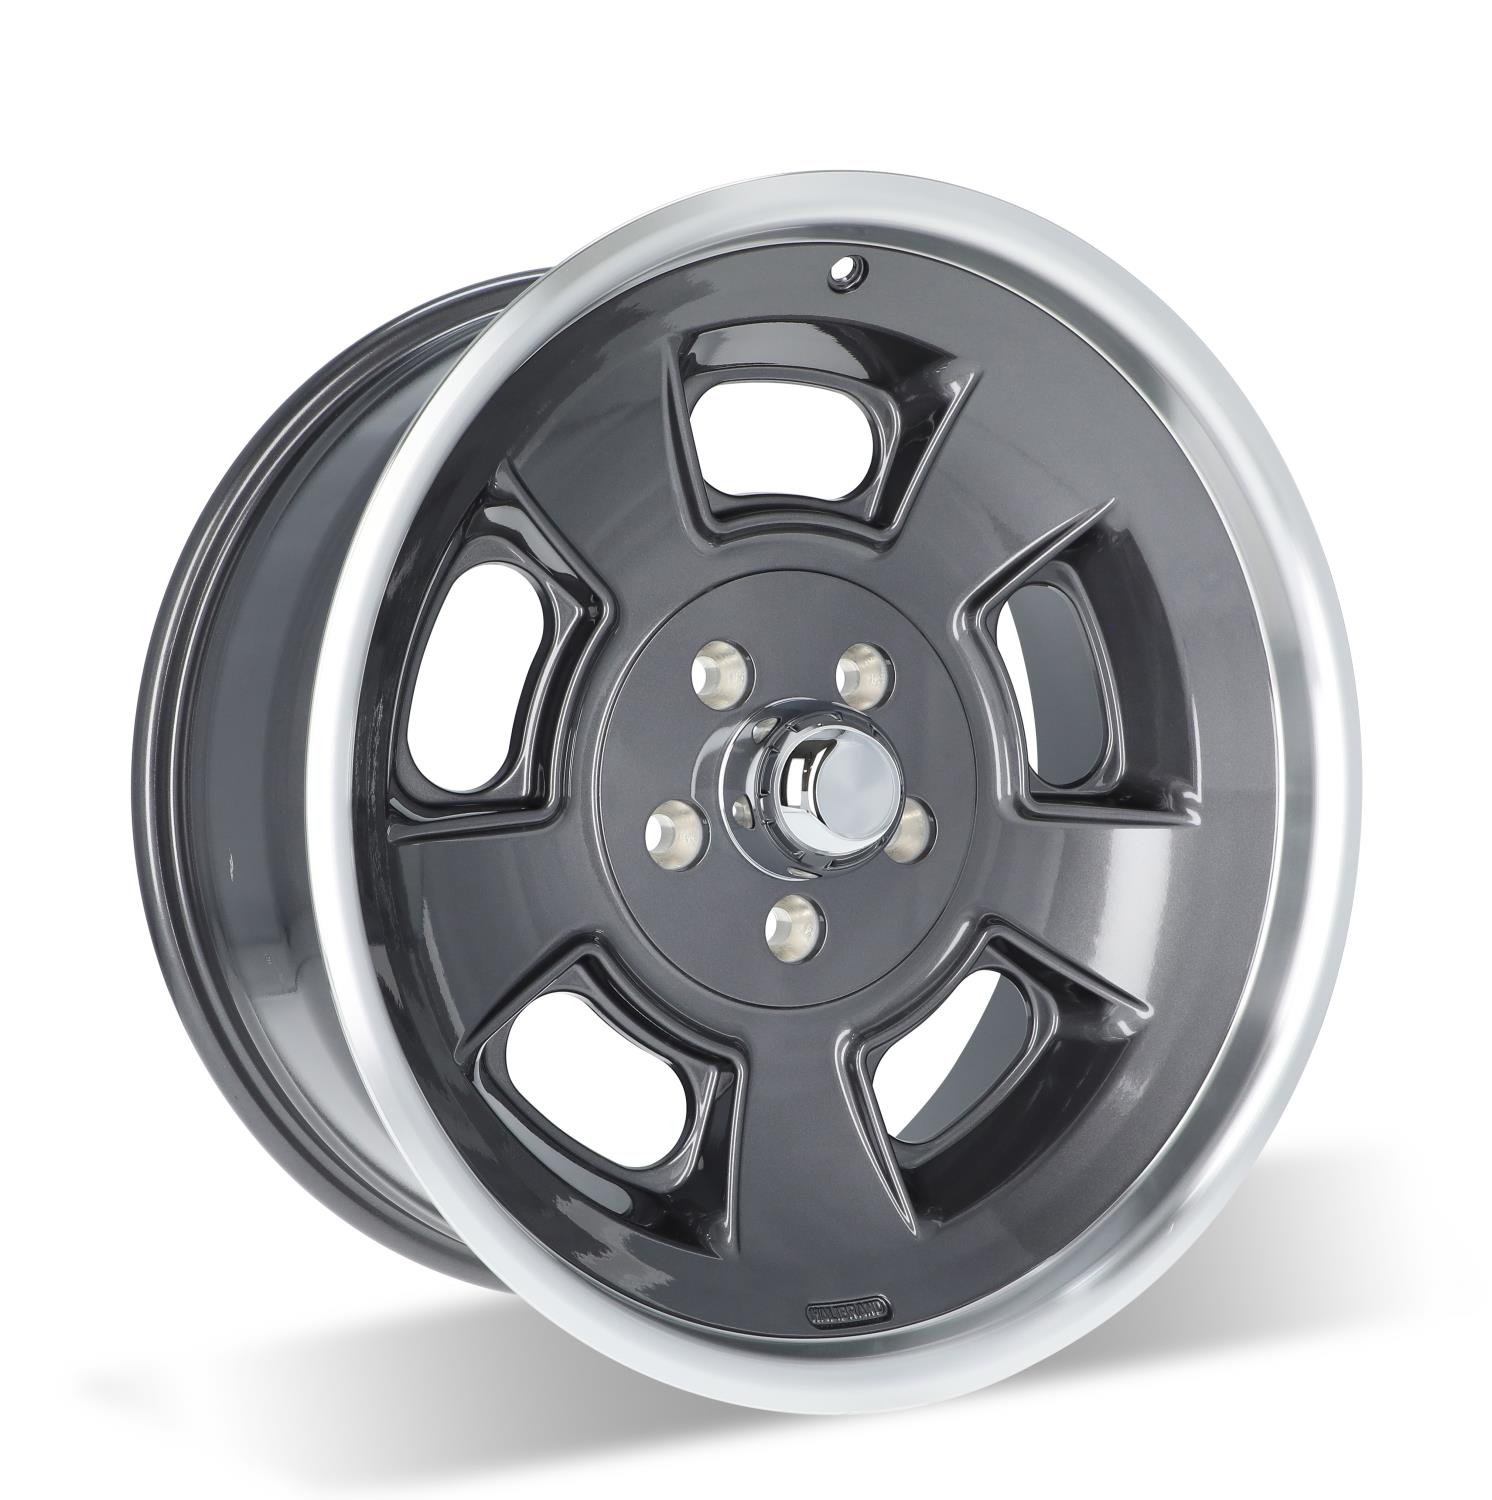 Sprint Front Wheel, Size: 19x8.5", Bolt Pattern: 5x5", Backspace: 4.75" [Anthracite with Machined Lip - Gloss Clearcoat]